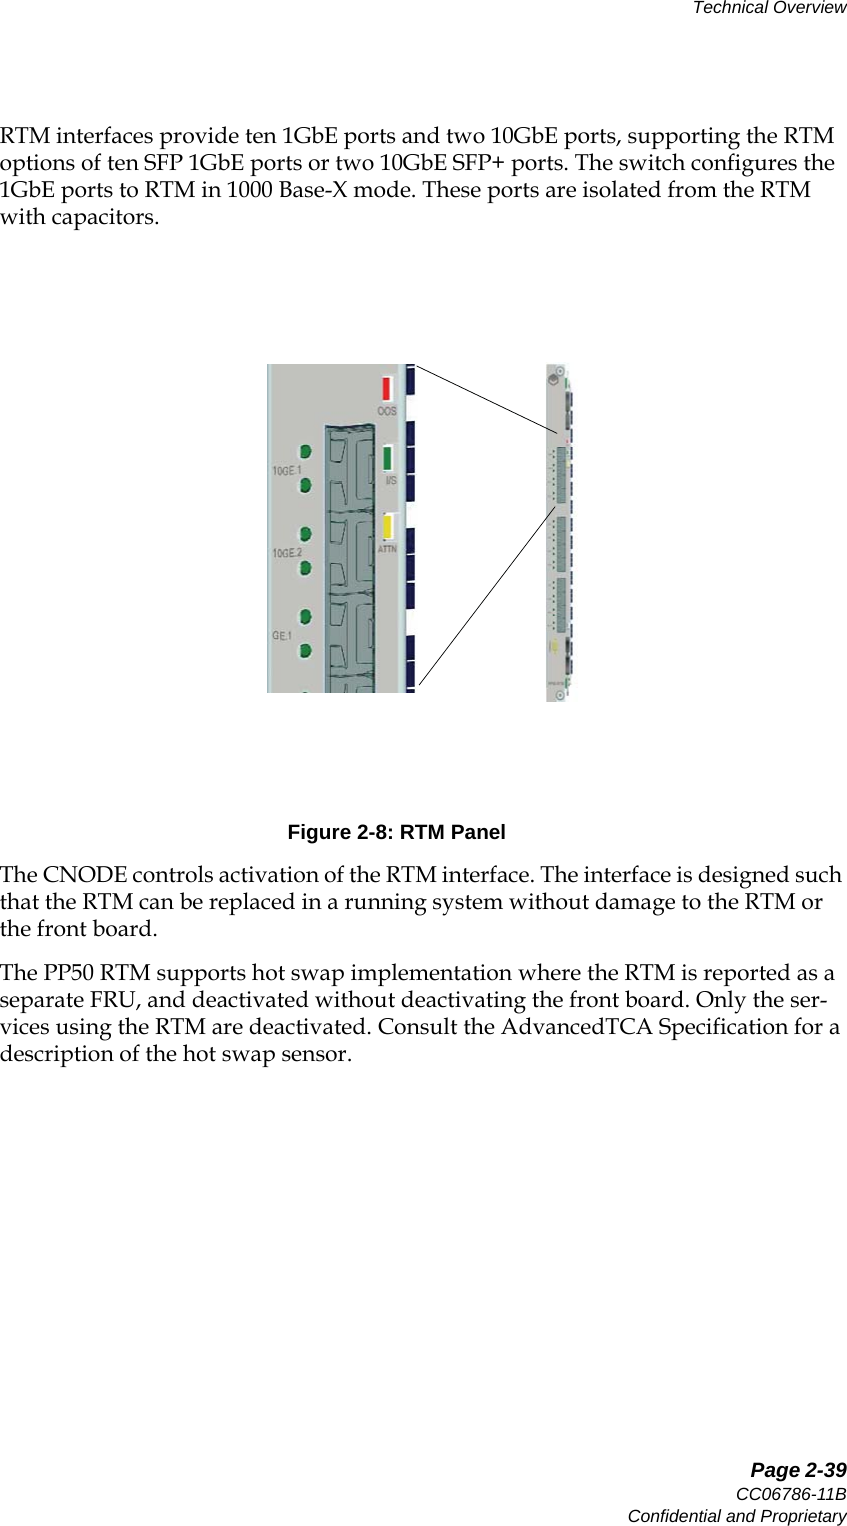   Page 2-39CC06786-11BConfidential and ProprietaryTechnical Overview14ABABPreliminaryRTM interfaces provide ten 1GbE ports and two 10GbE ports, supporting the RTM options of ten SFP 1GbE ports or two 10GbE SFP+ ports. The switch configures the 1GbE ports to RTM in 1000 Base-X mode. These ports are isolated from the RTM with capacitors.Figure 2-8: RTM PanelThe CNODE controls activation of the RTM interface. The interface is designed such that the RTM can be replaced in a running system without damage to the RTM or the front board. The PP50 RTM supports hot swap implementation where the RTM is reported as a separate FRU, and deactivated without deactivating the front board. Only the ser-vices using the RTM are deactivated. Consult the AdvancedTCA Specification for a description of the hot swap sensor.